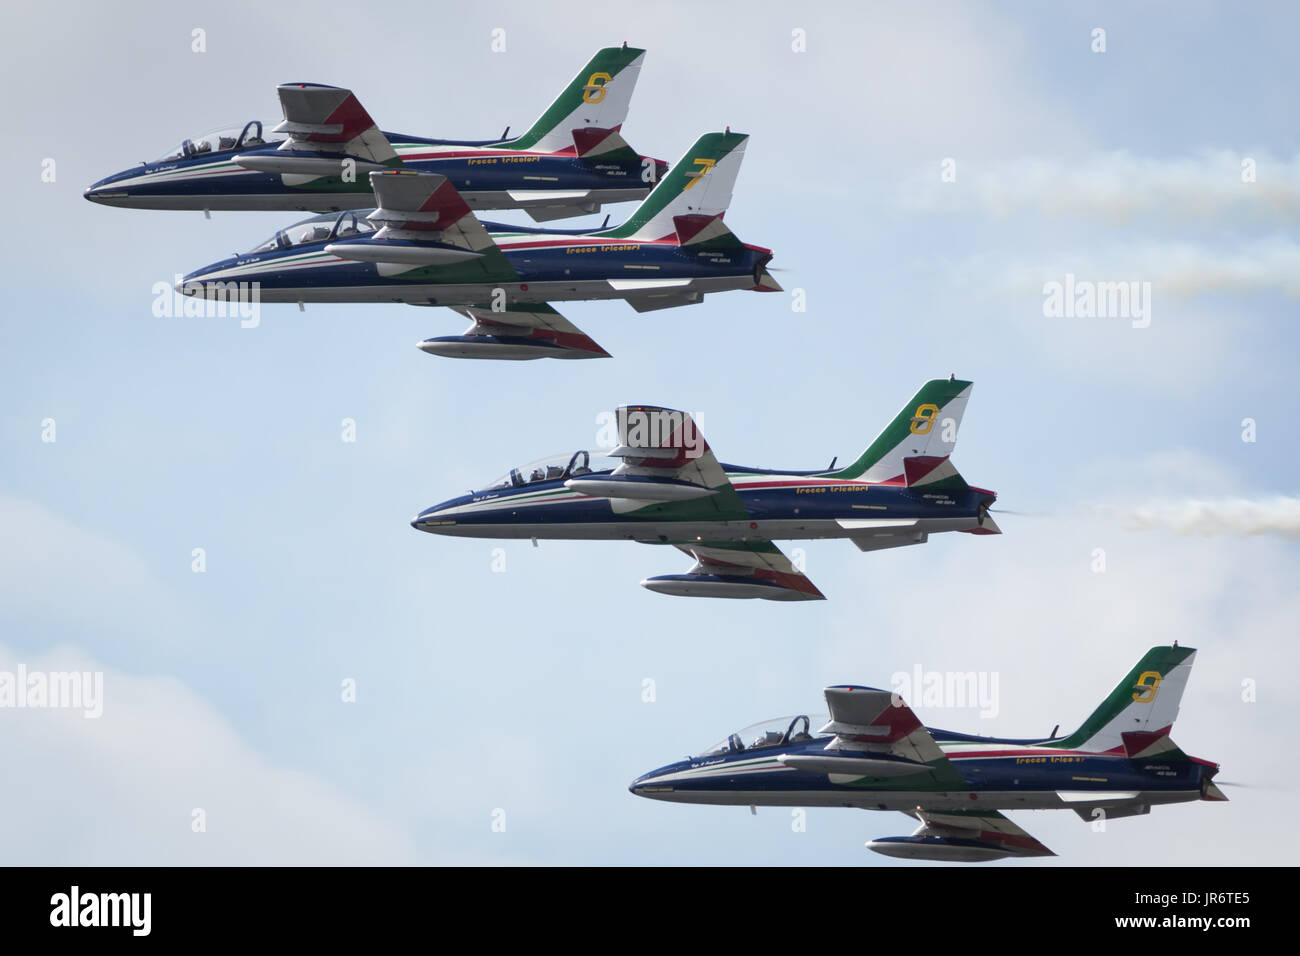 Fairford, Gloucestershire, UK - July 10th, 2016: The Italian Air Force Frecce Tricolori Display Team perform at Fairford International Air Tattoo 2016 Stock Photo